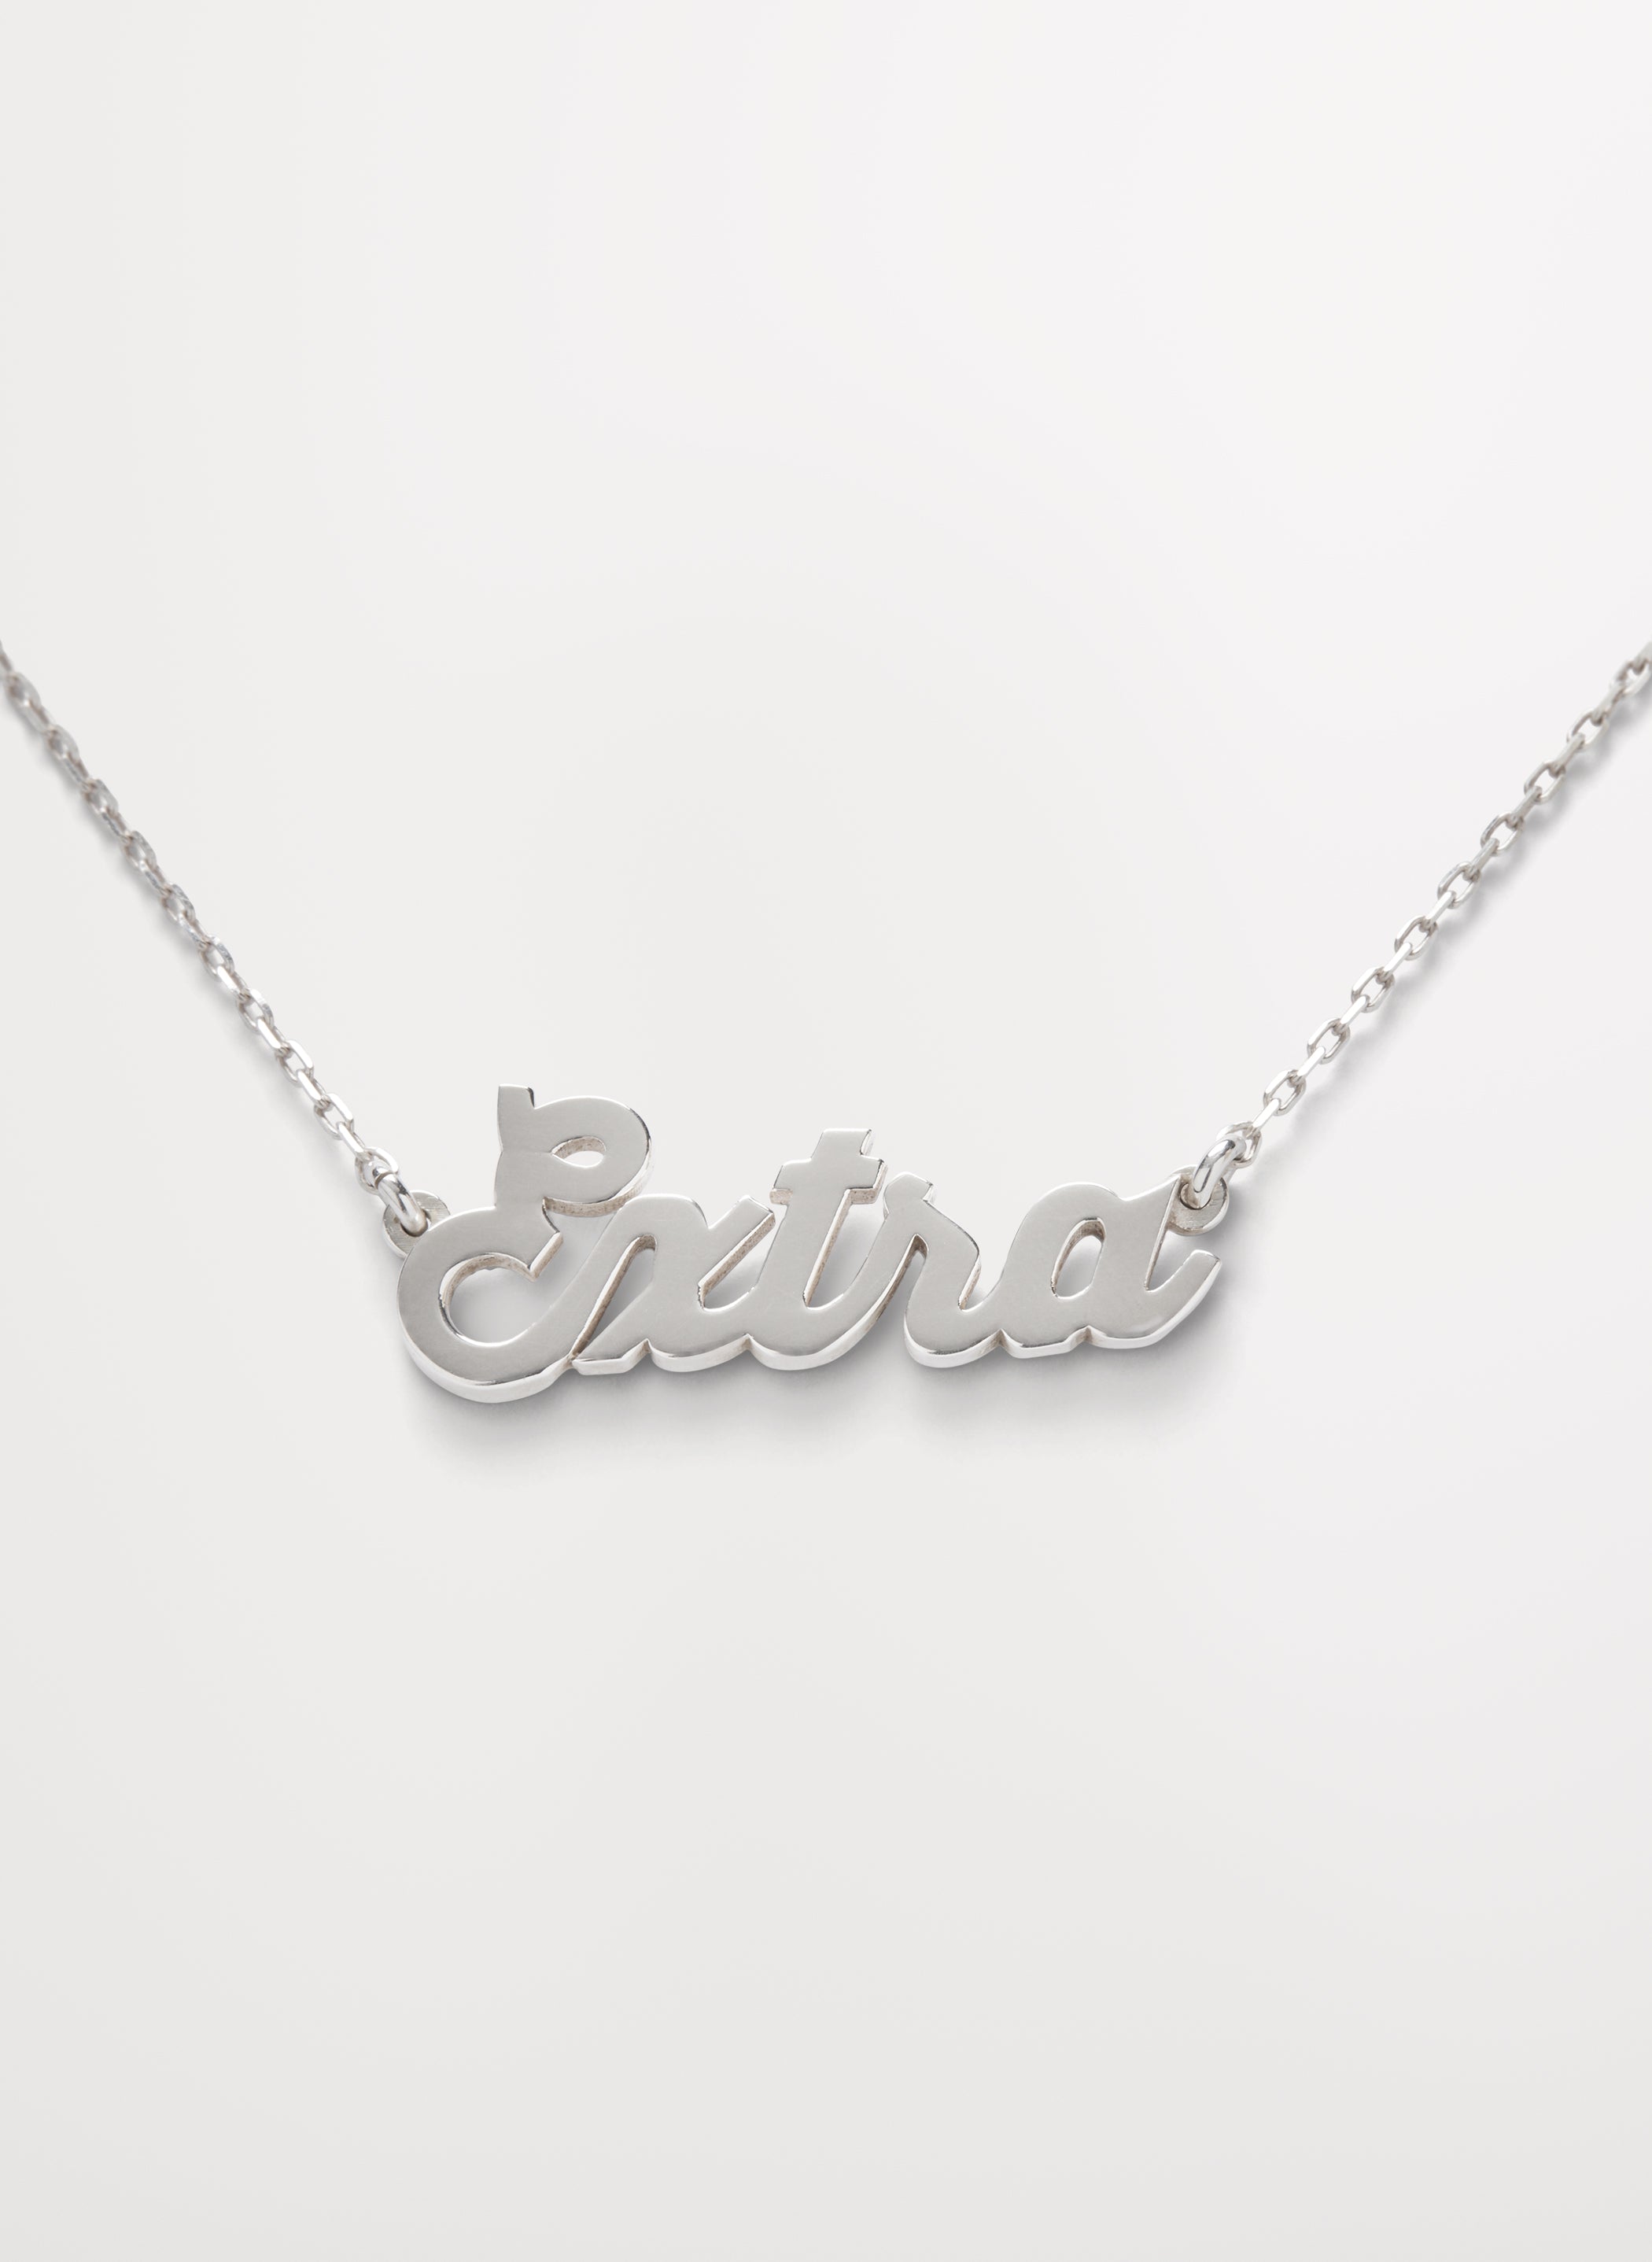 Bing Bang / Chipotle Extra Necklace